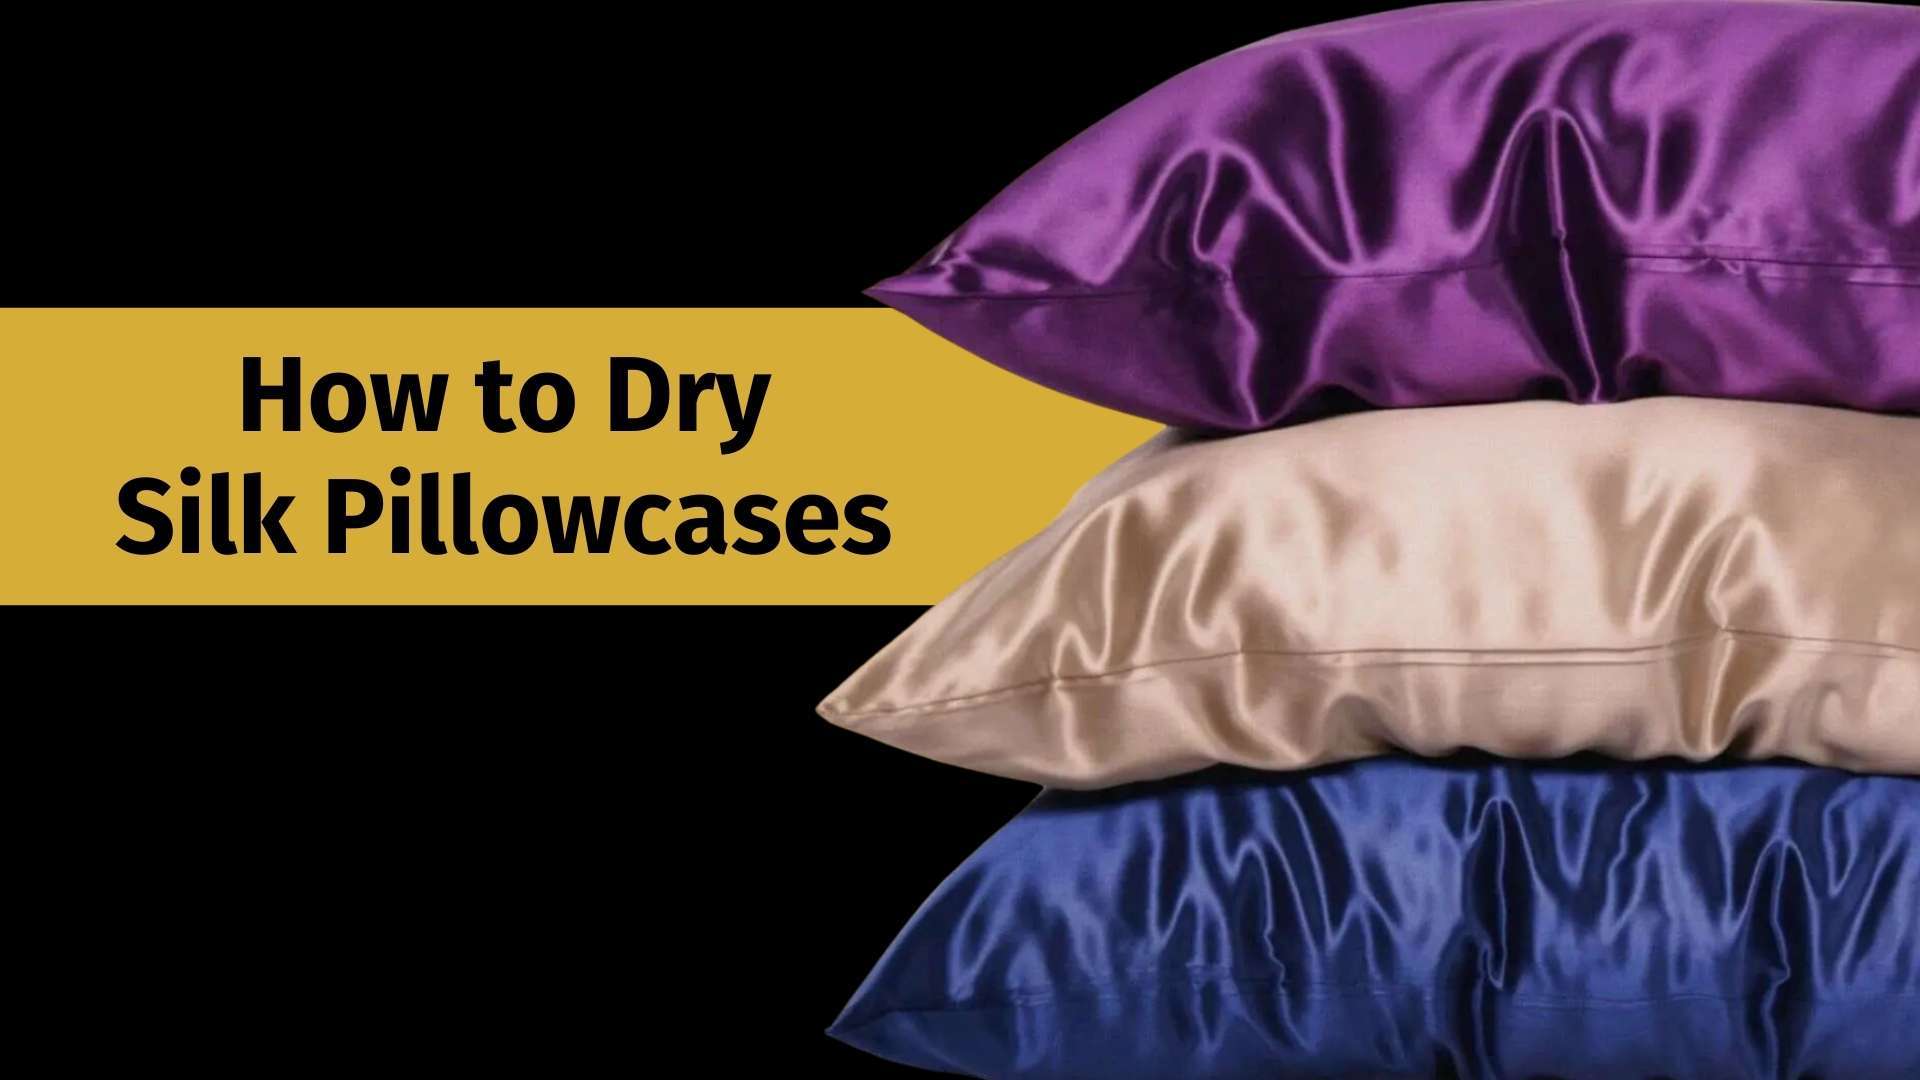 how to dry silk pillowcases banner image with a picture of 3 silk pillowcases stacked on top of each other